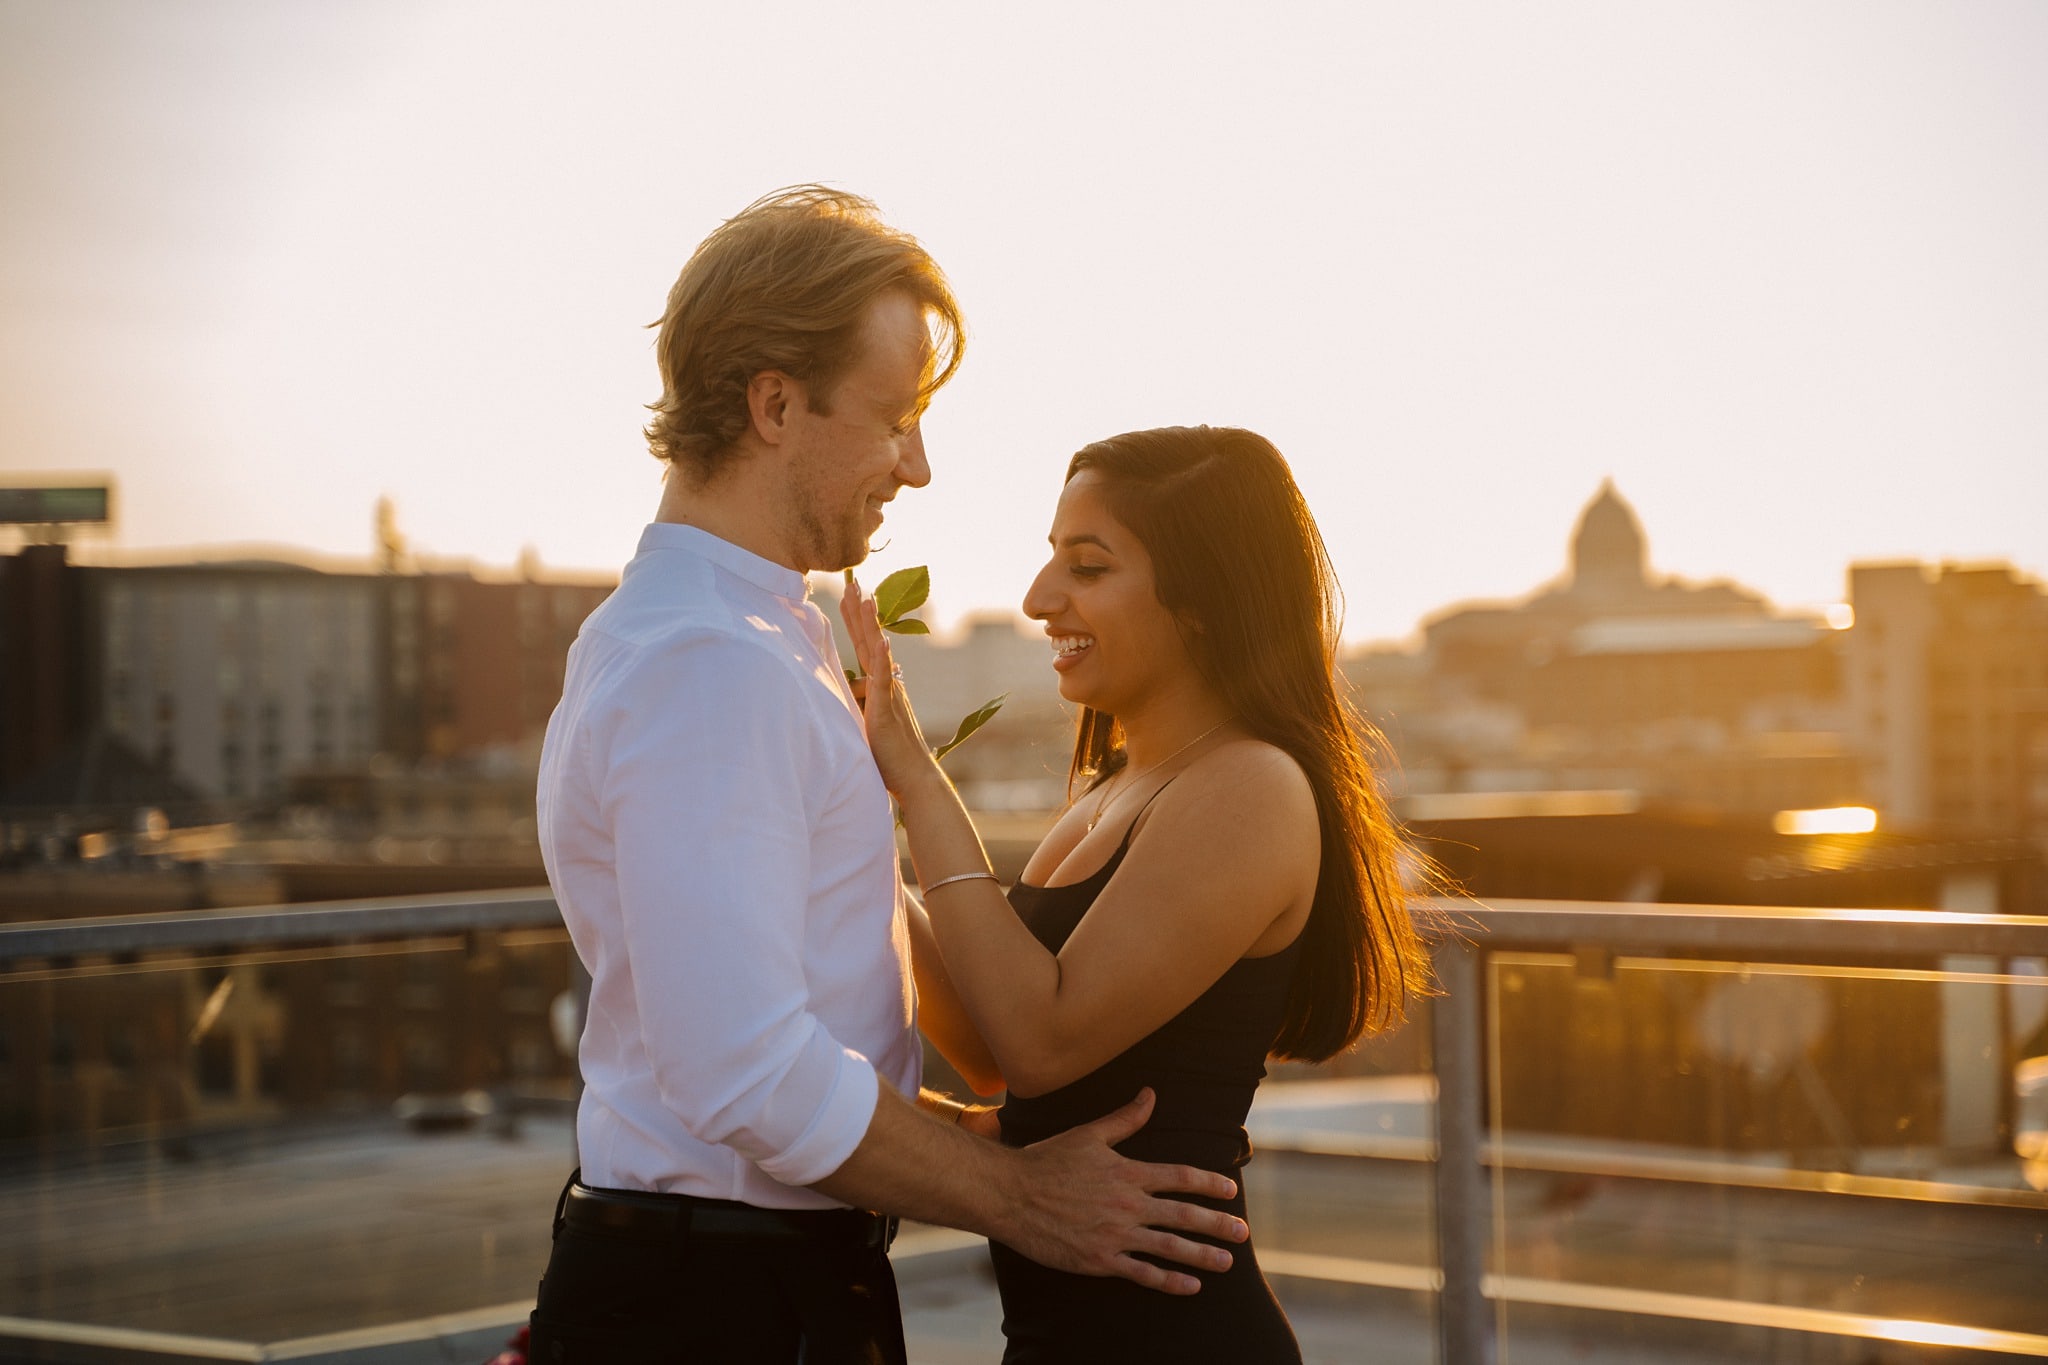 newly engaged couple admiring ring after A'bulae rooftop proposal